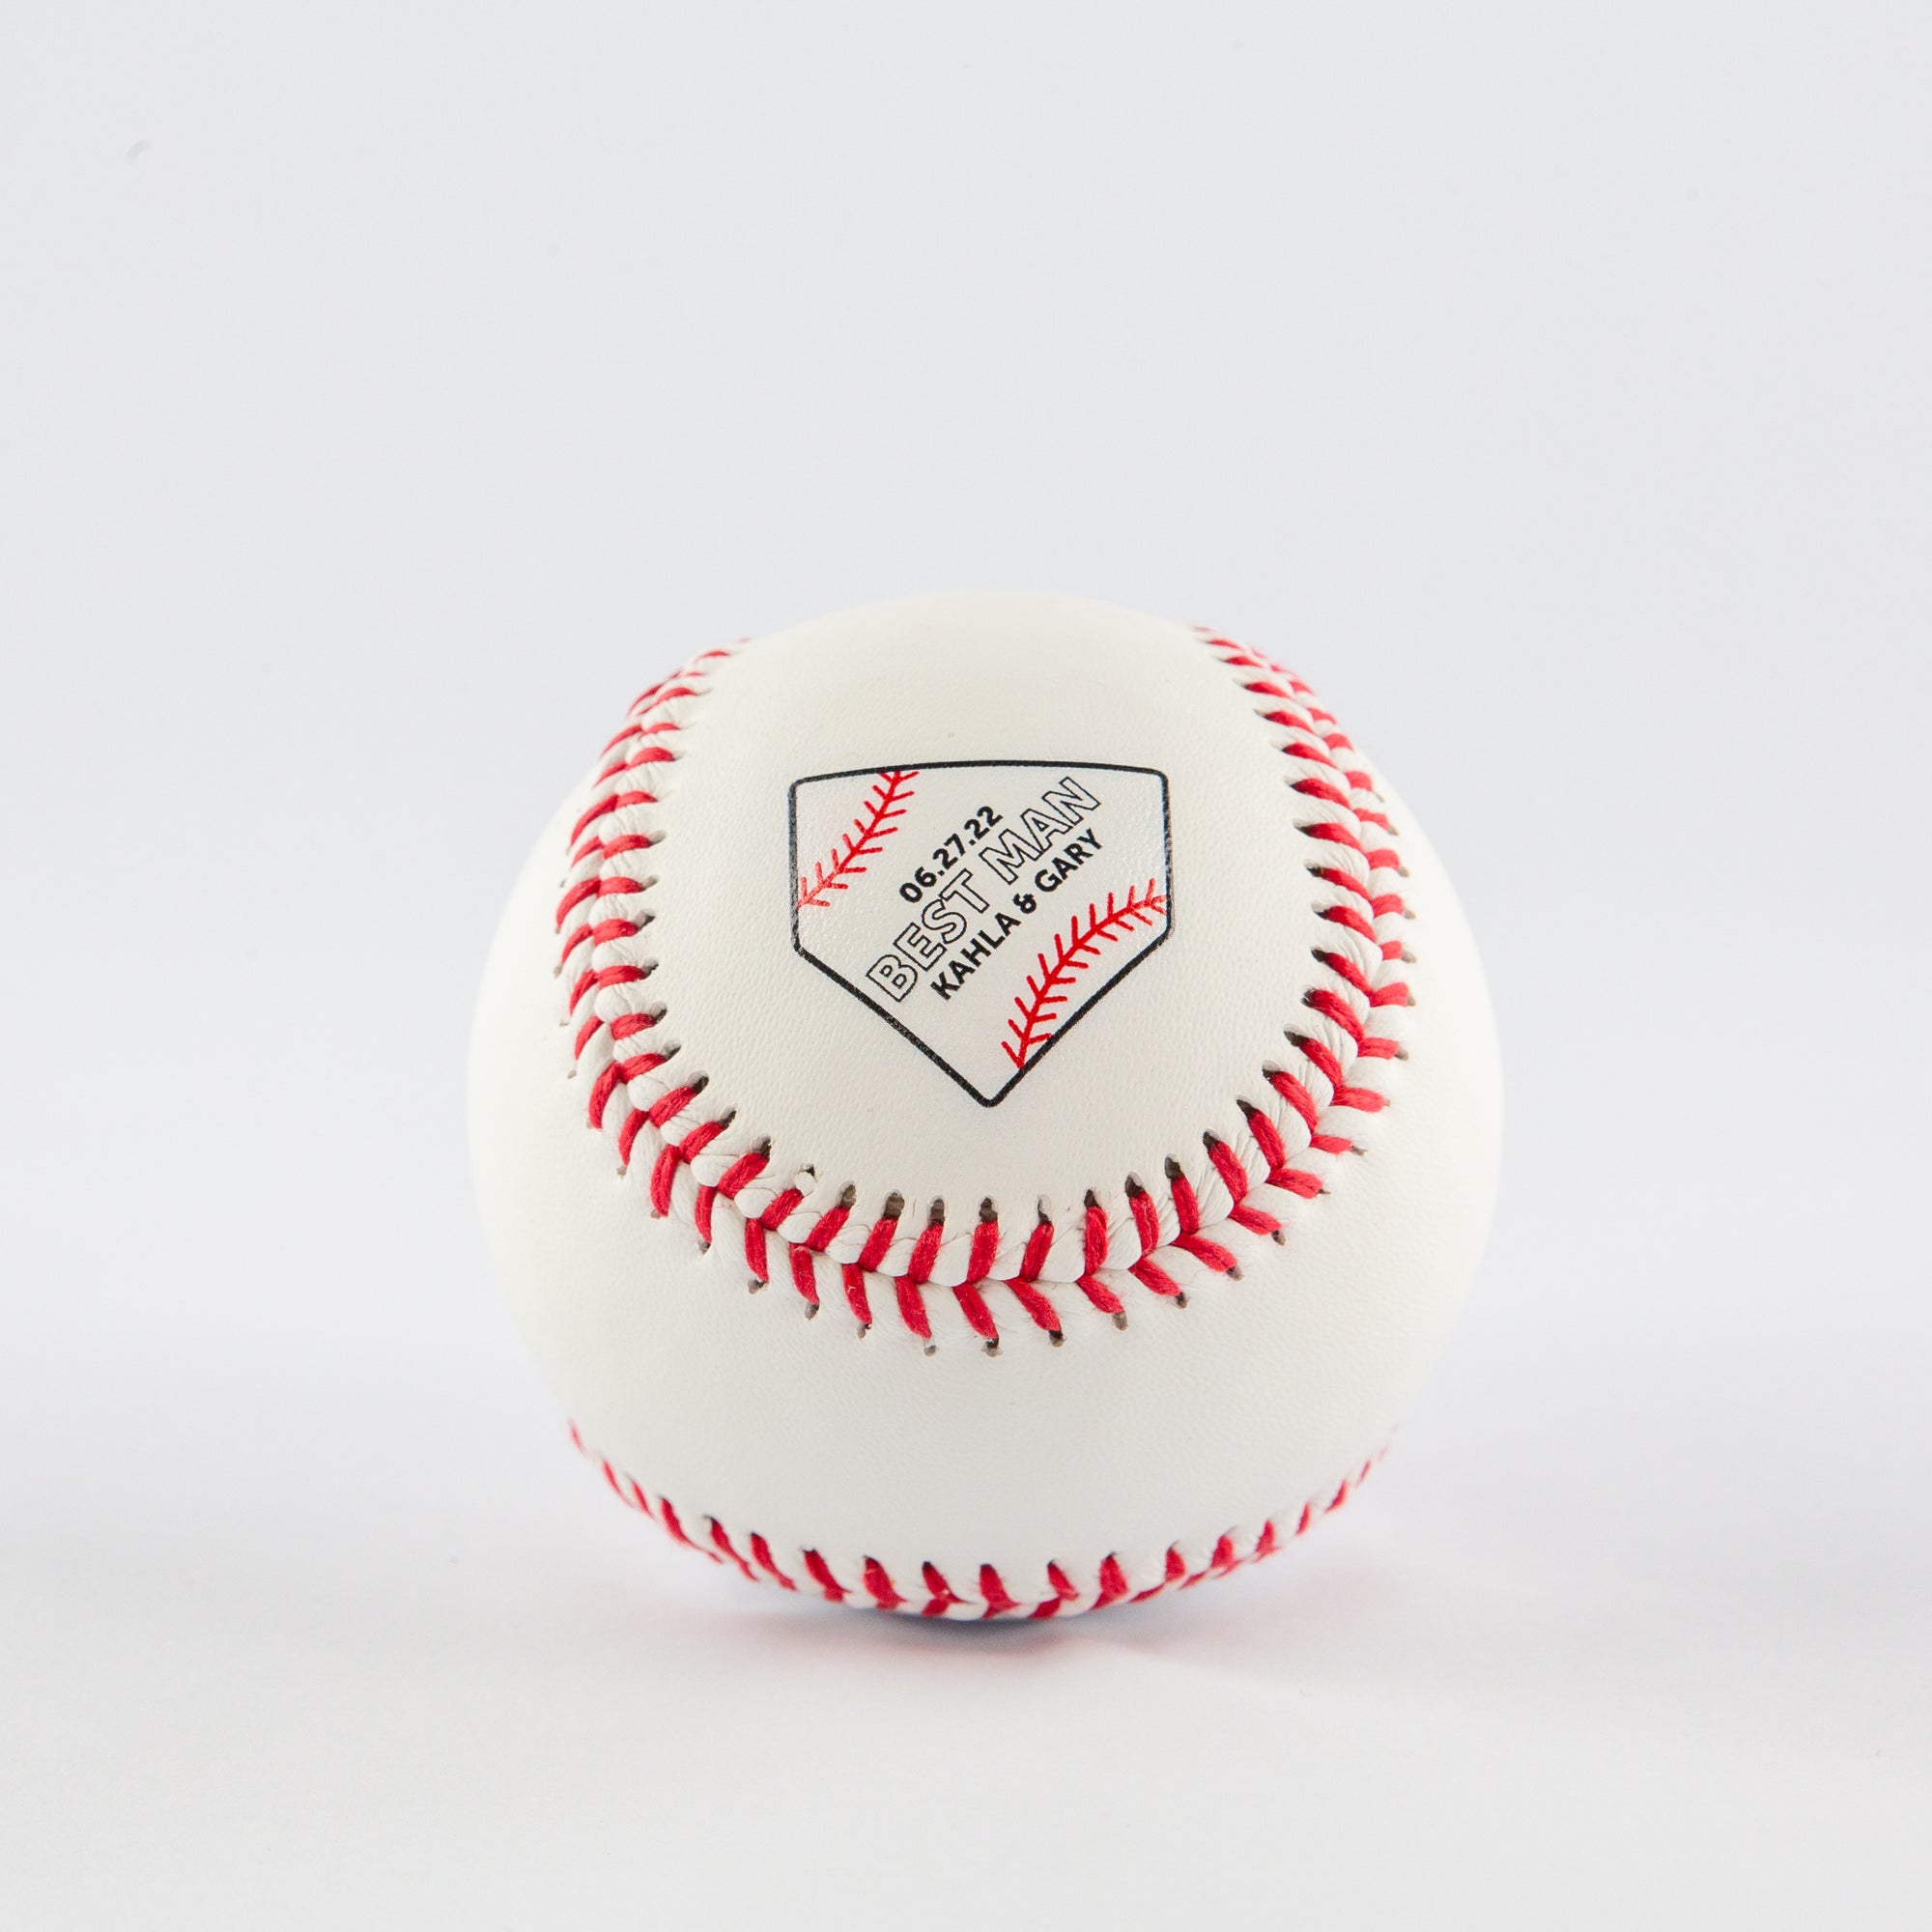 Printed Baseball with Home Plate Wedding Date, Wedding Party Role, Couple Name Design